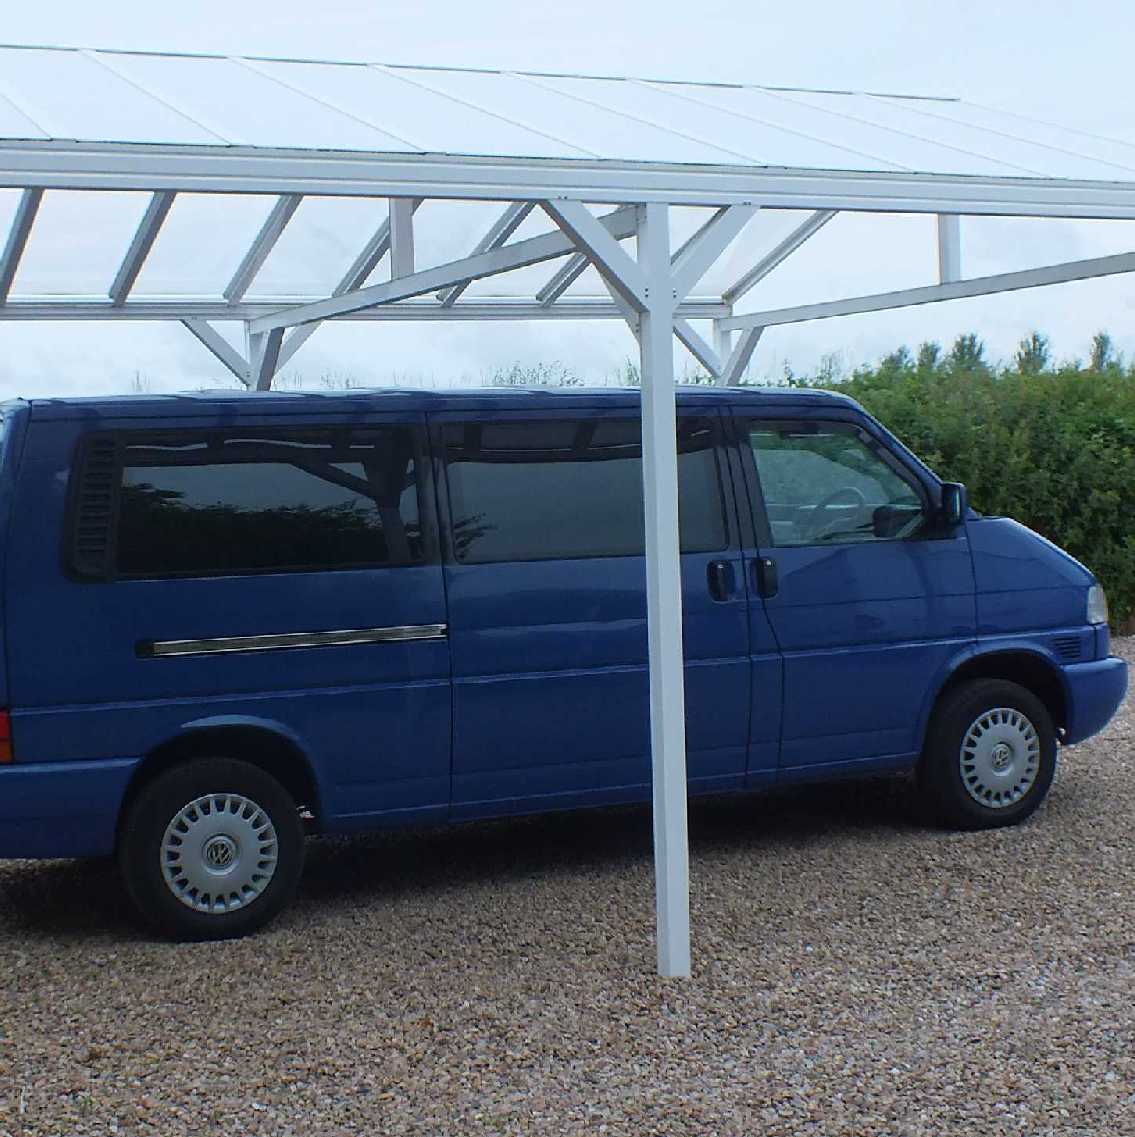 Great deals on Omega Smart Free-Standing, White Gable-Roof (type 1) Canopy with 16mm Polycarbonate Glazing - 5.2m (W) x 4.0m (P), (6) Supporting Posts